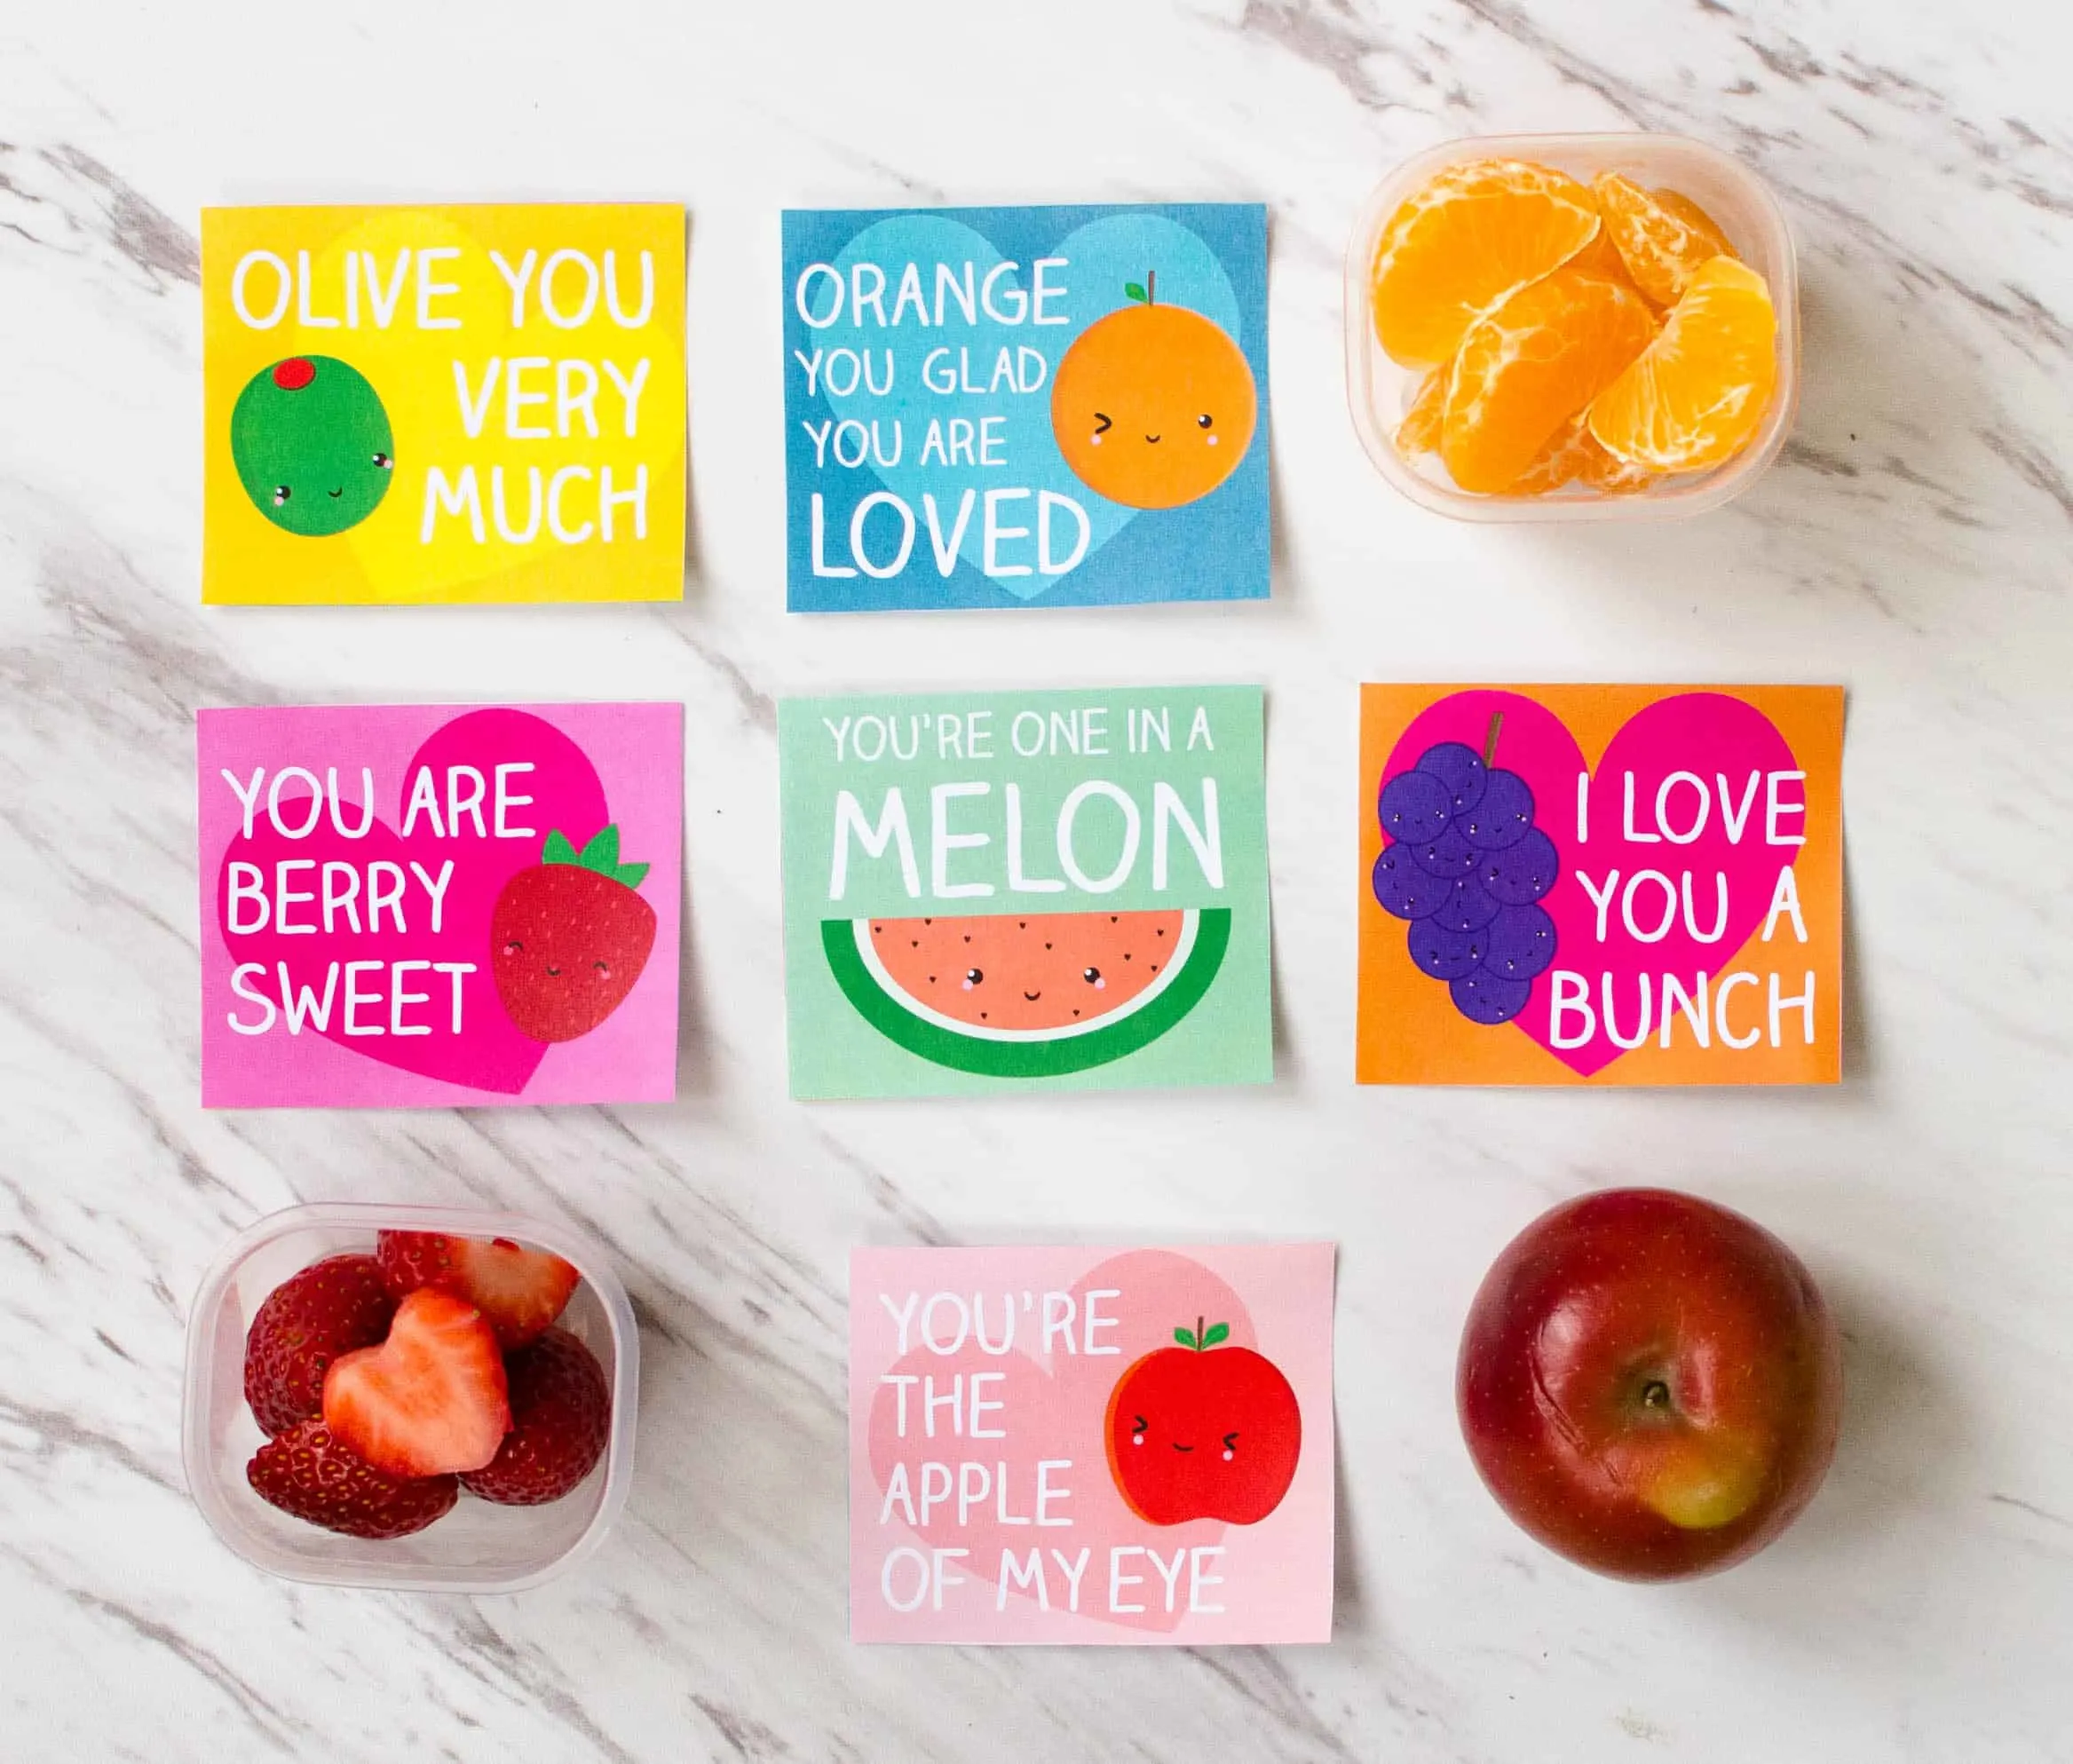 Super-cute free printable lunch box love notes for kids. Download and print these in time to slip them in your kid's lunchbox. #ValentinesPrintables #FreePrintable